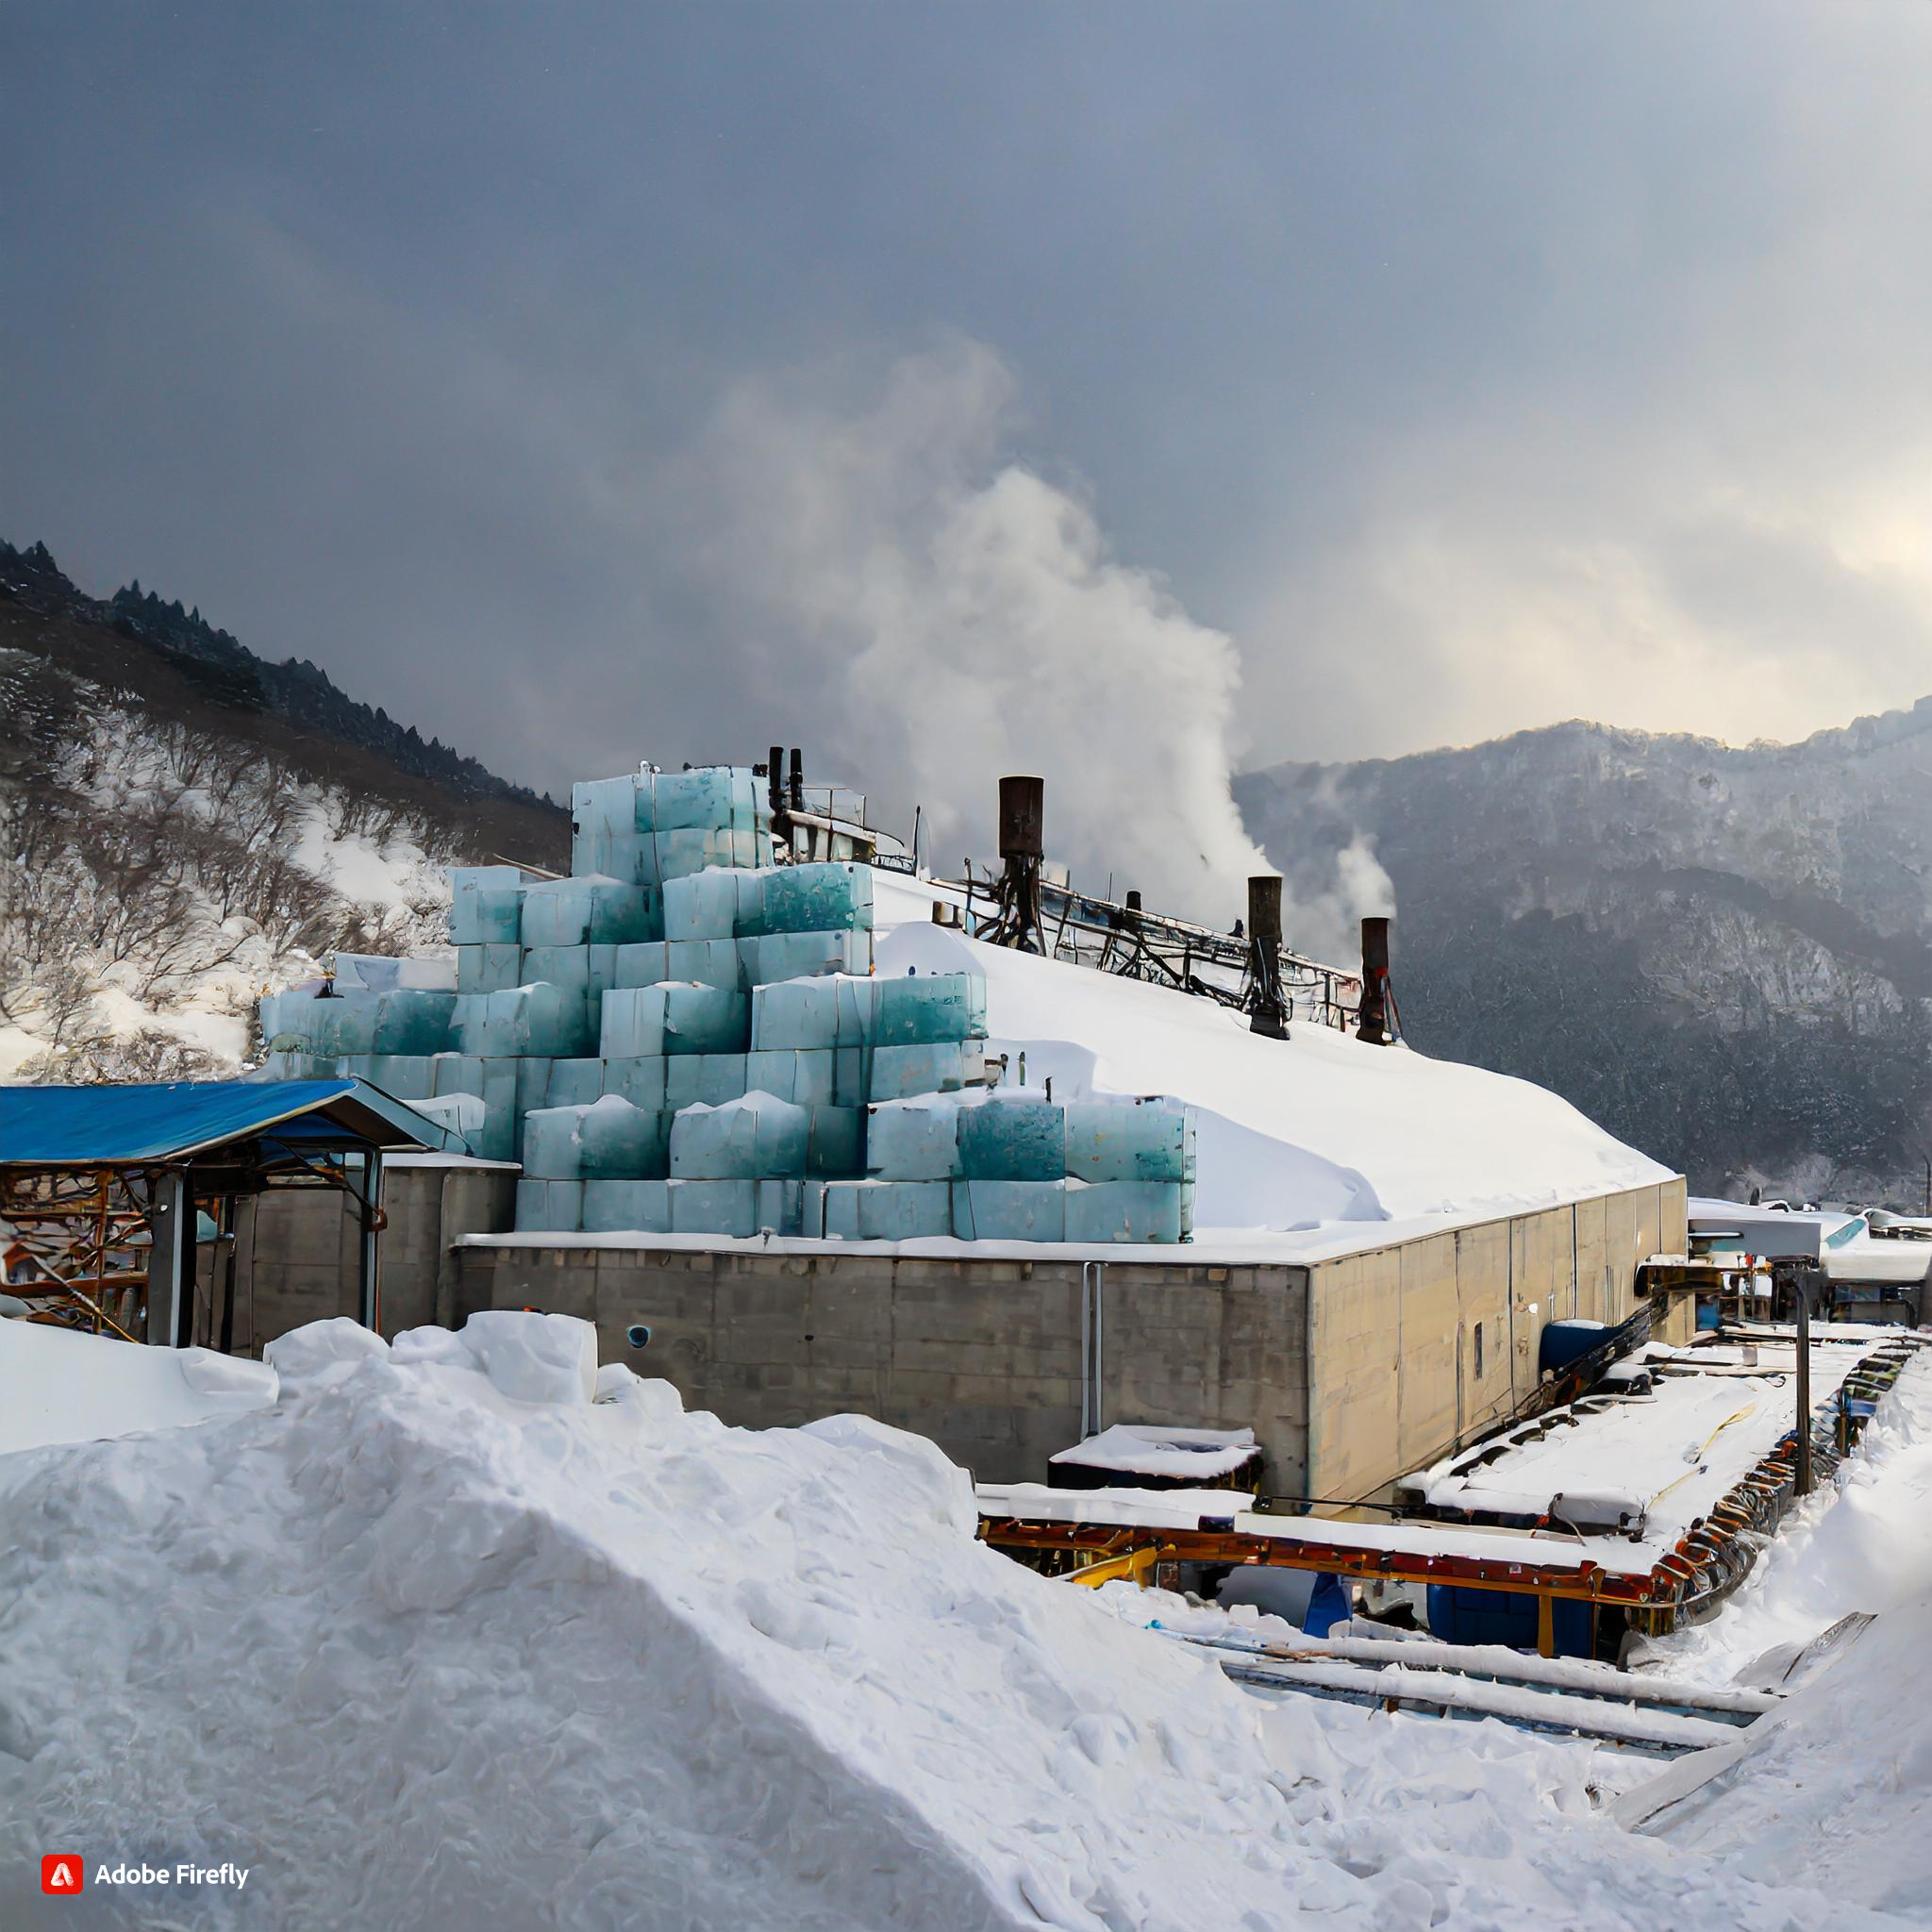 Firefly An ice brick factory is set up on top of a snowy mountain. It should be written on the...jpg